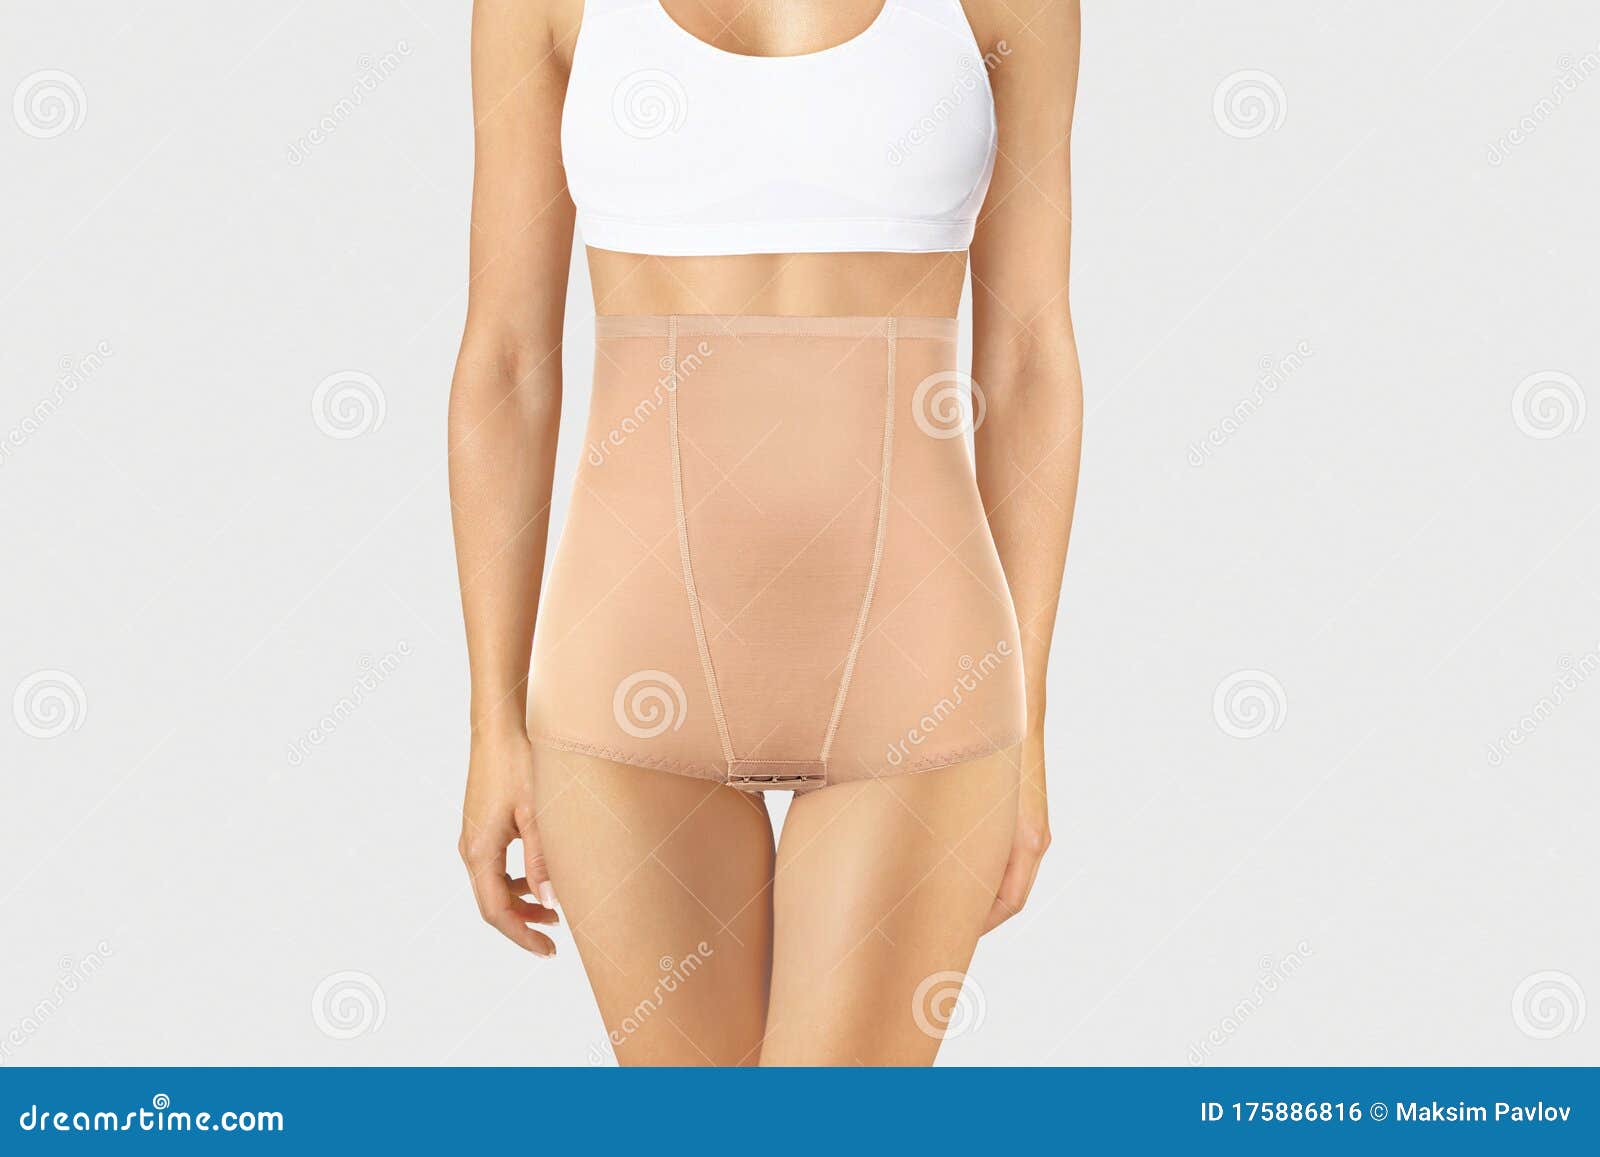 Hook-and-loop Fastening at the Gusset. Postnatal Bandage. Medical  Compression Underwear Stock Image - Image of belly, care: 224007863